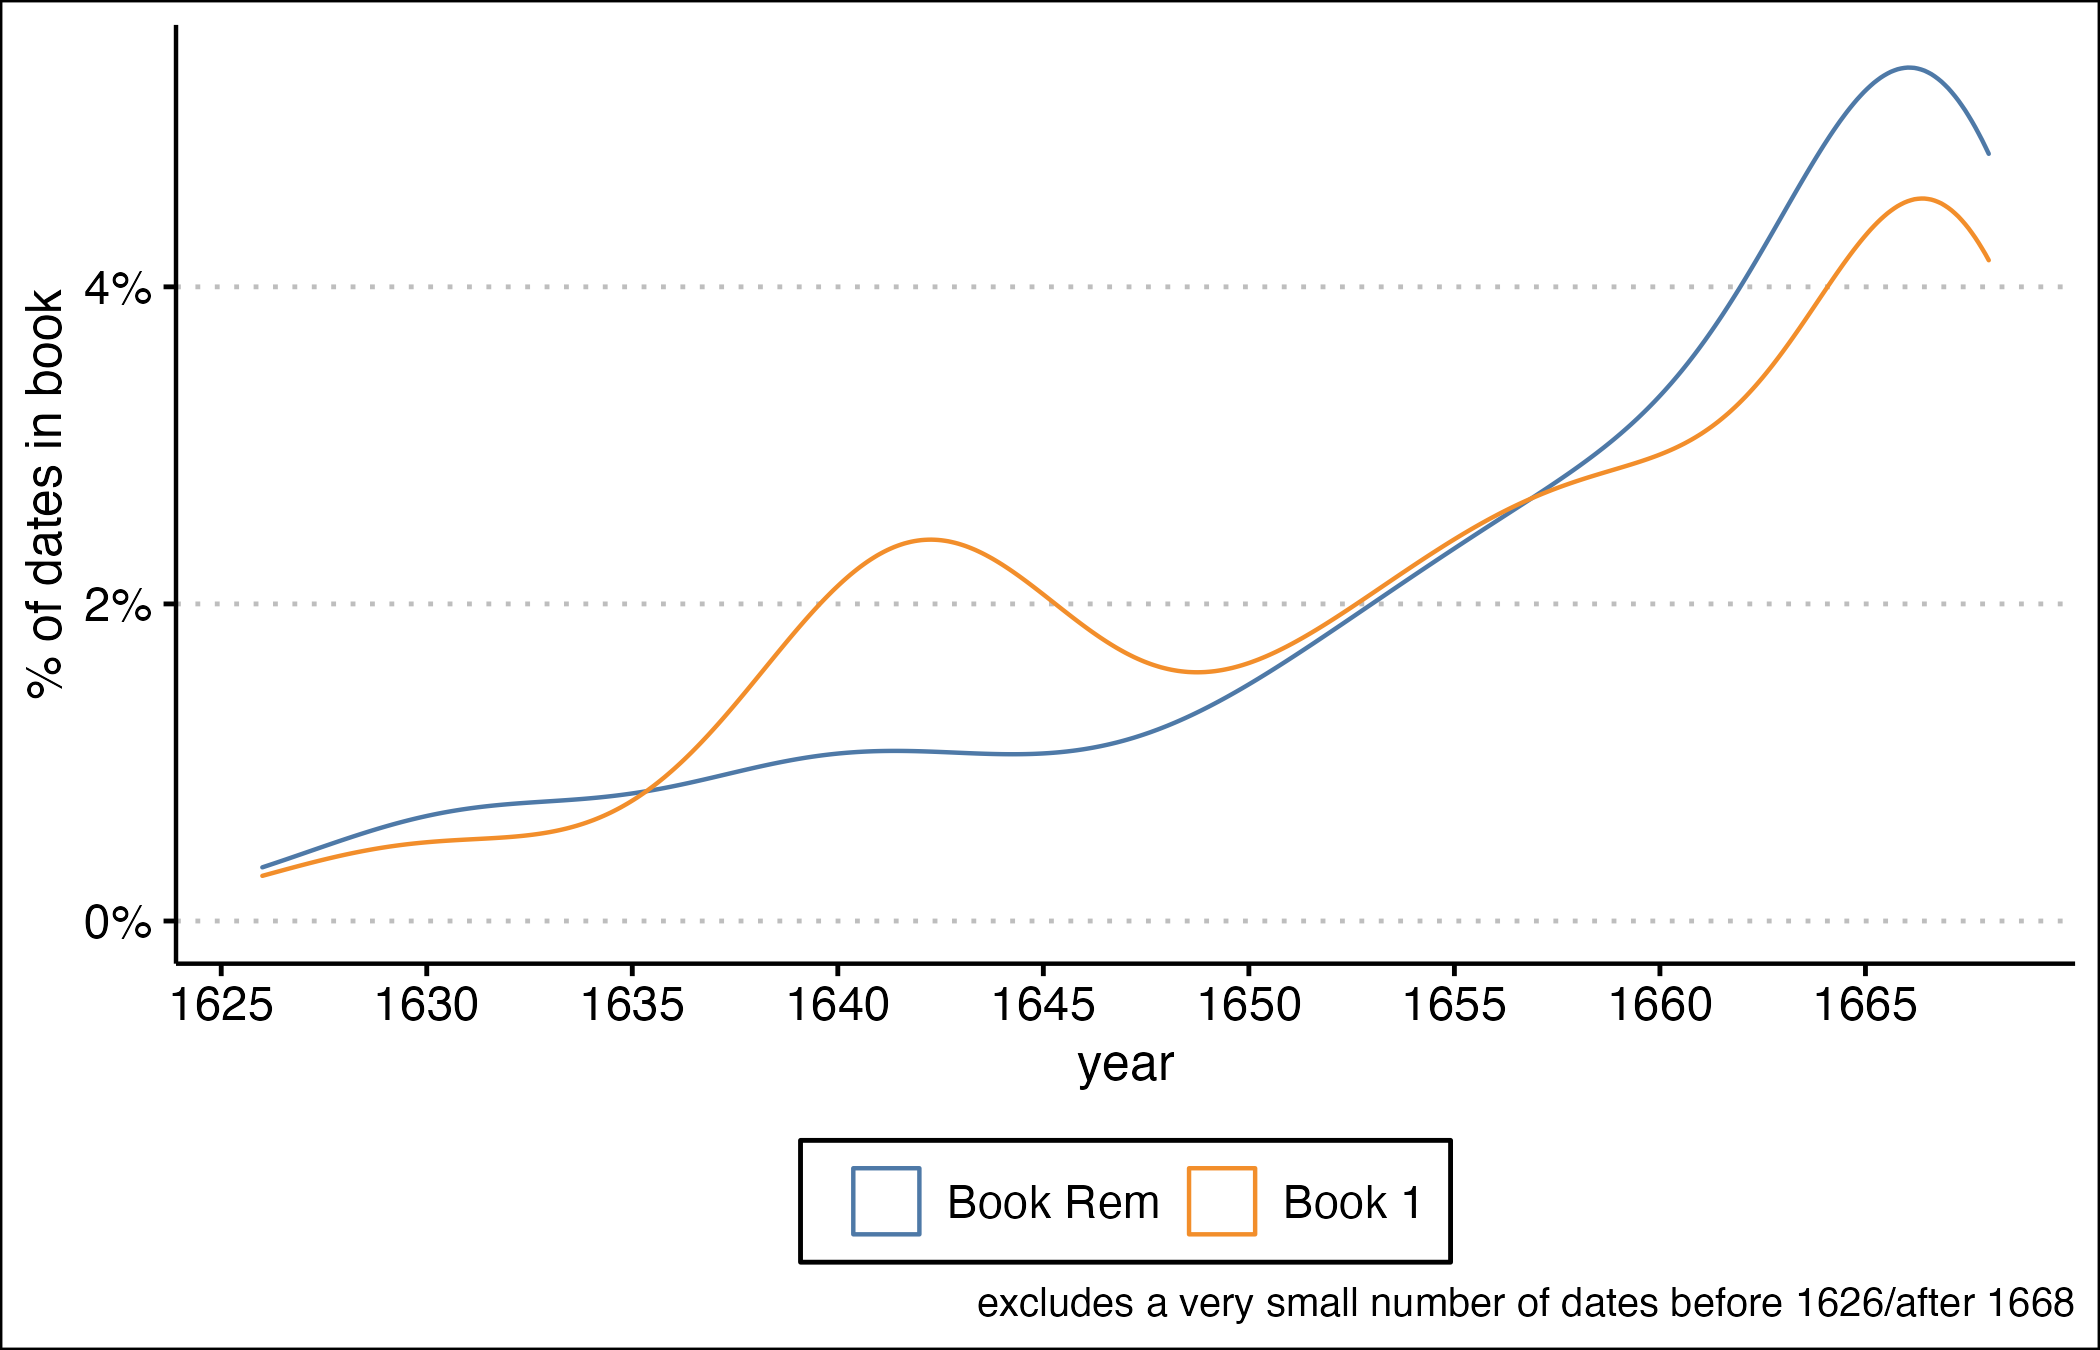 A density chart which plots the years of tagged dates in Alice's two books as percentages of the total, enabling comparison of the distribution of the dates.